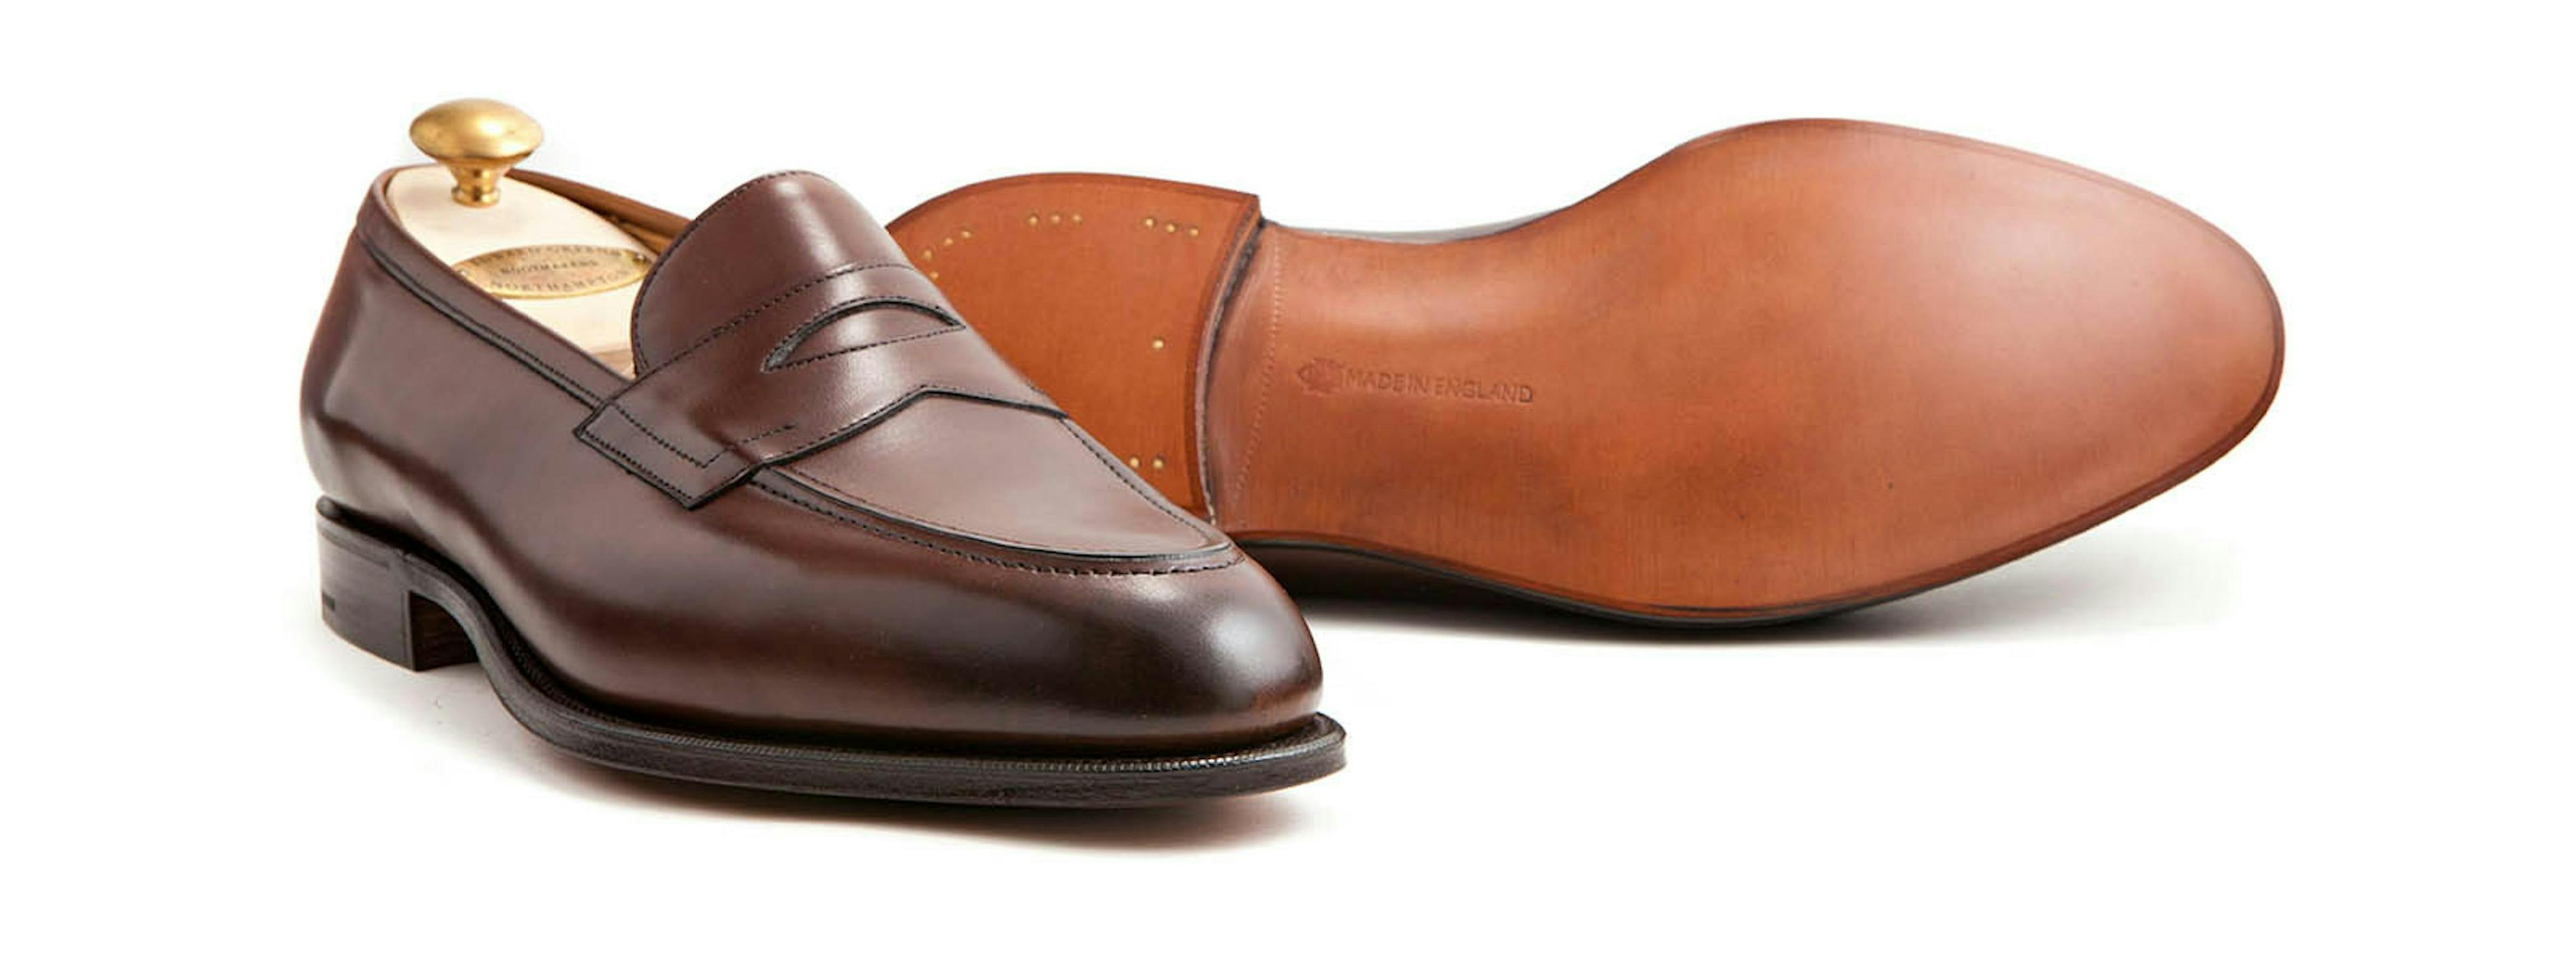 An Edward Green Piccadilly in dark oak calfskin, with a view of its single leather soles.